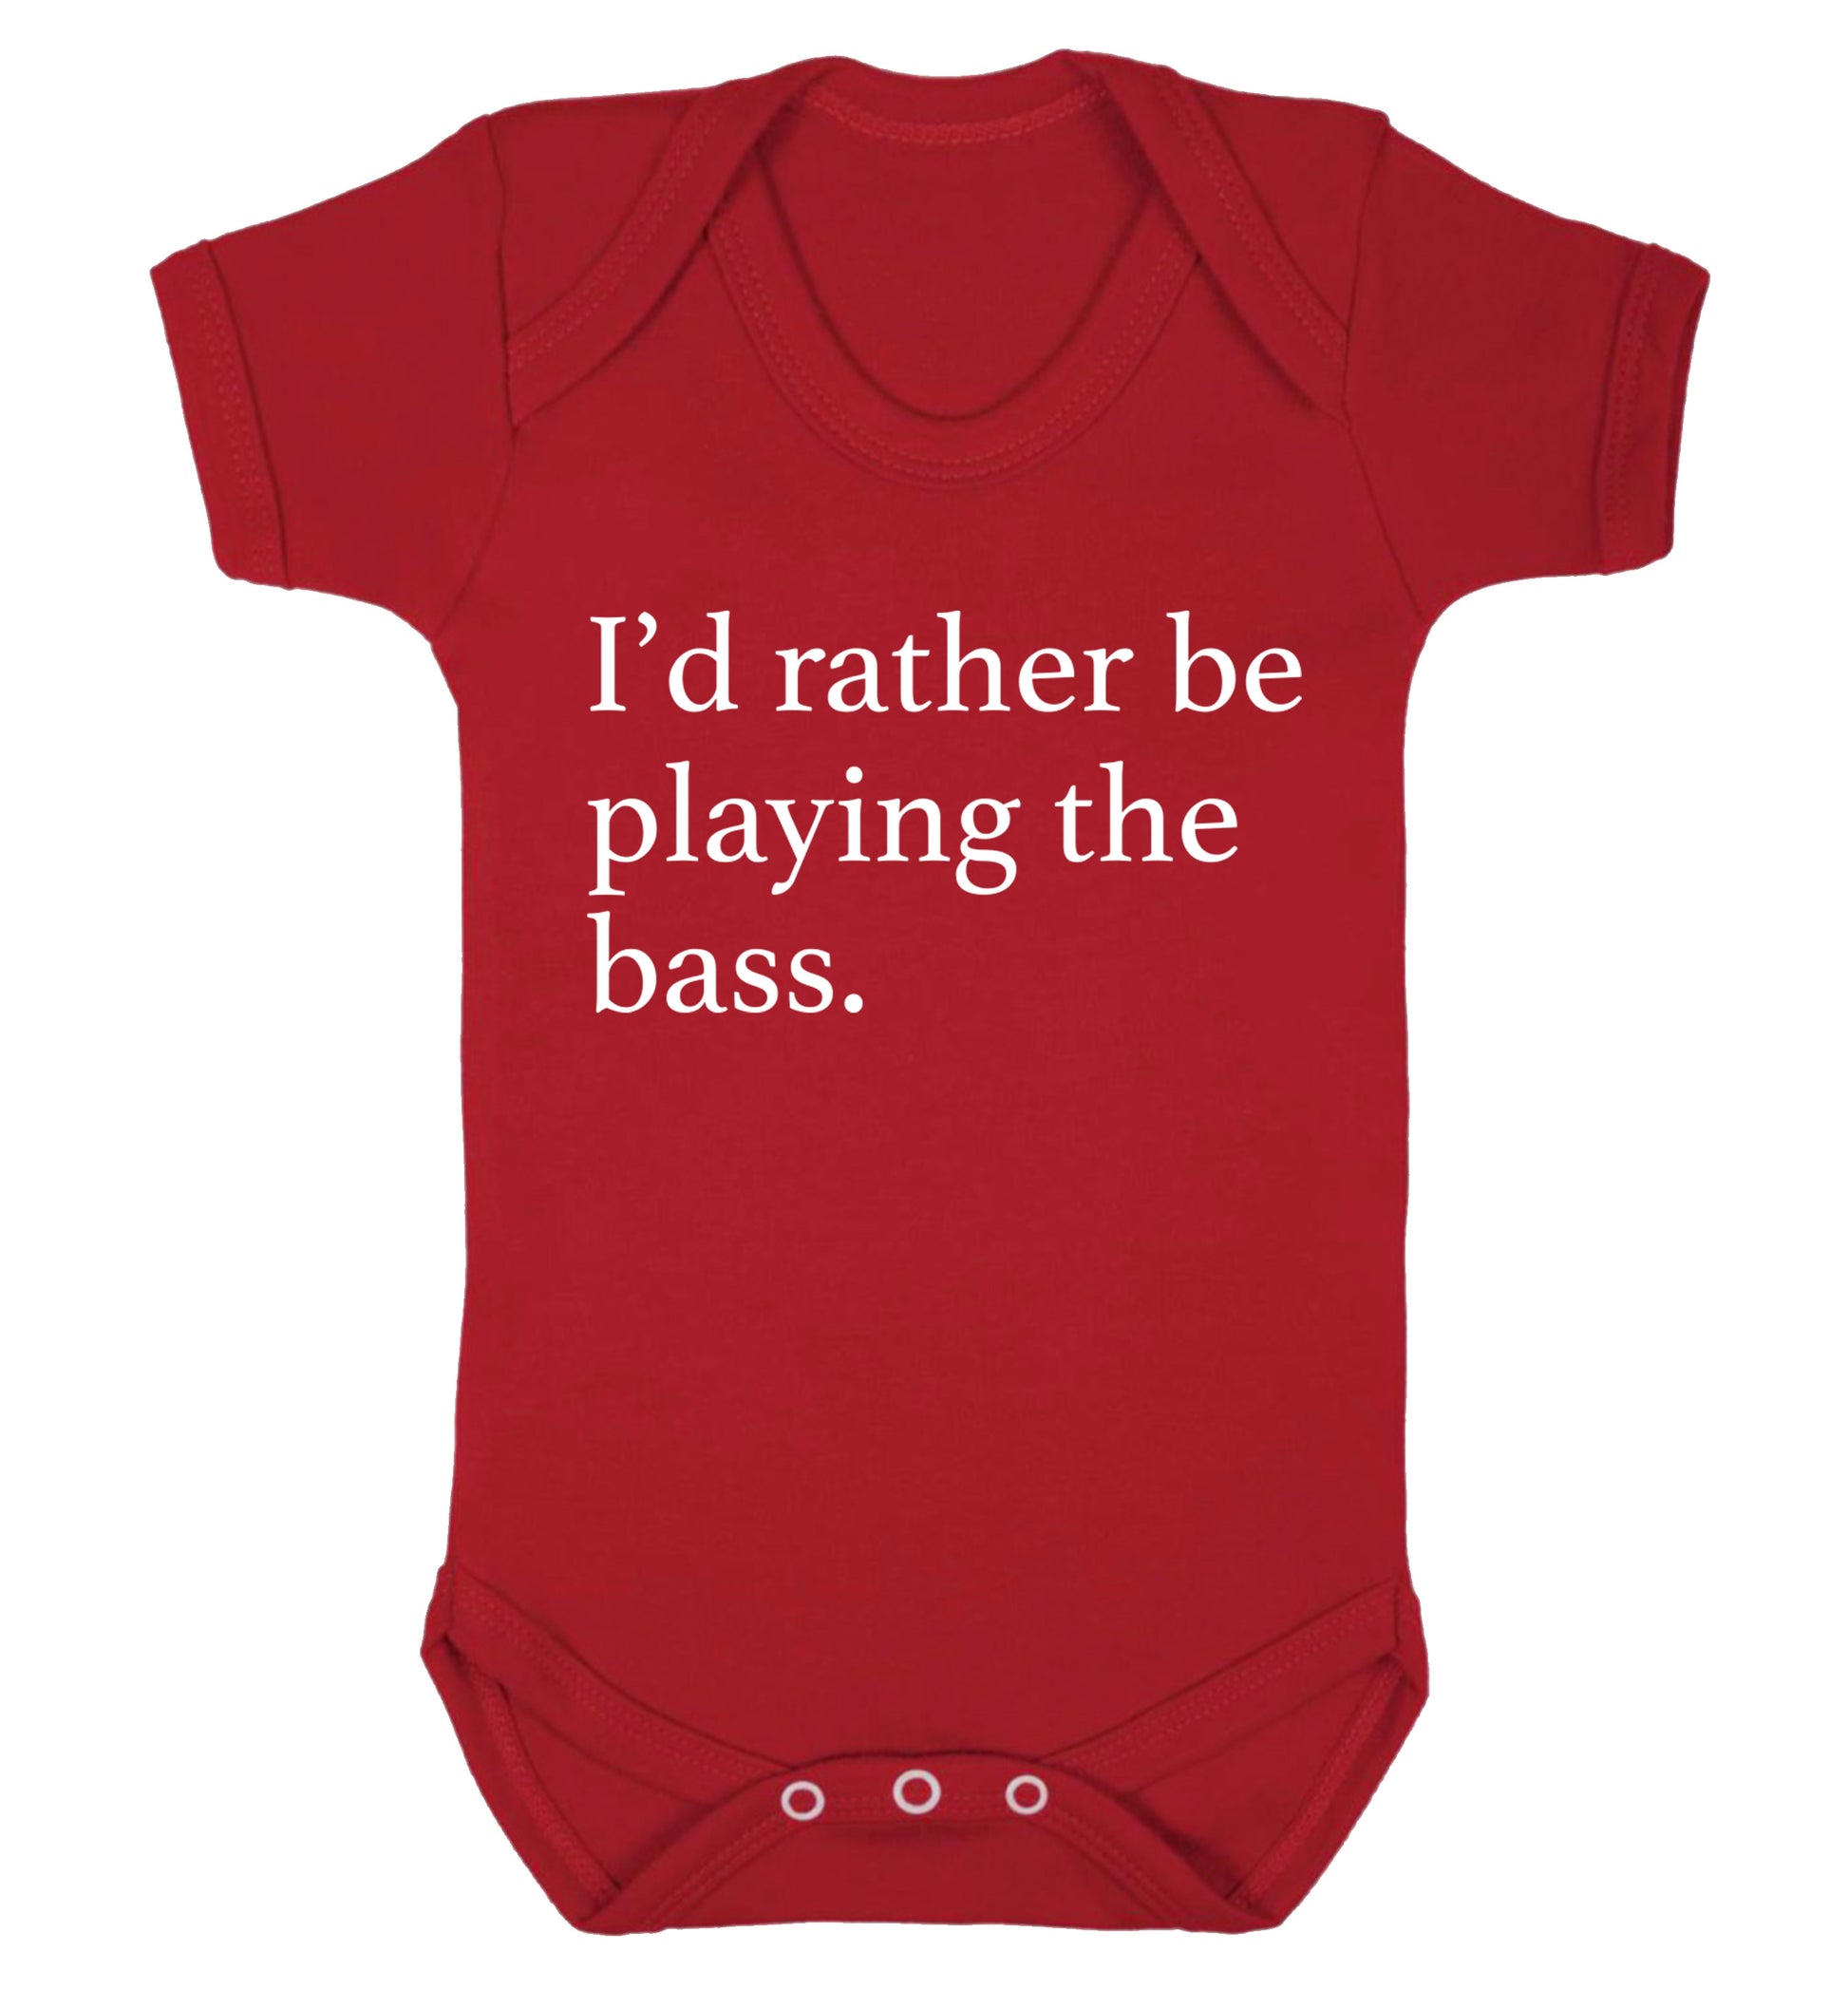 I'd rather by playing the bass Baby Vest red 18-24 months